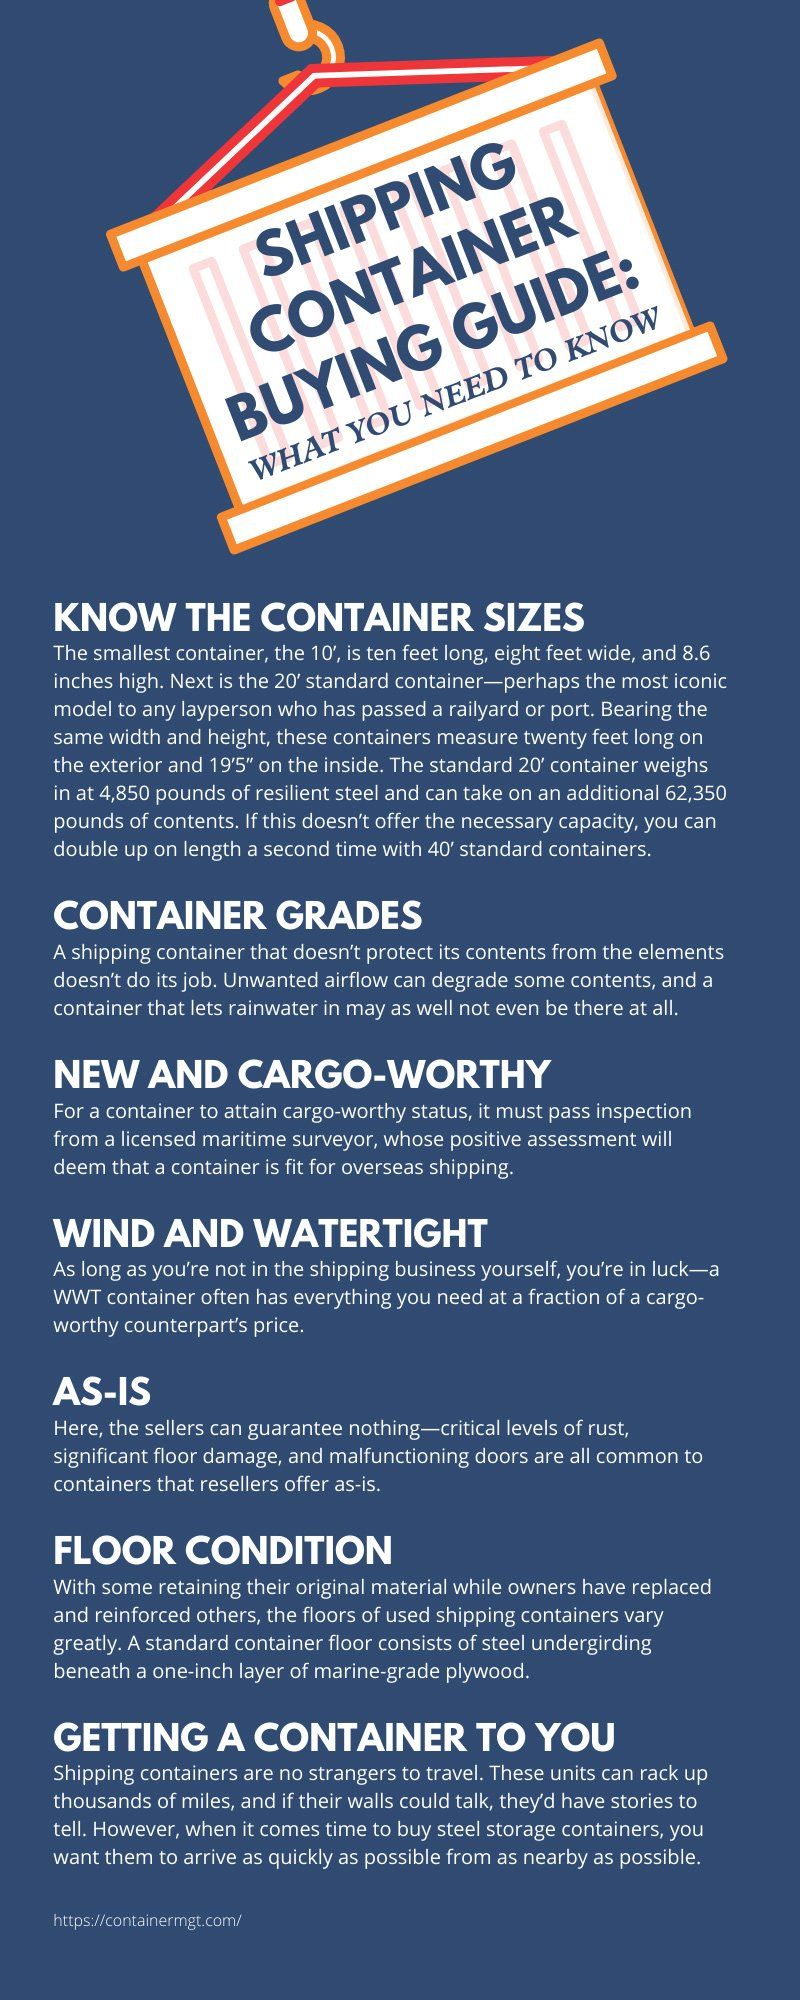 Shipping Container Buying Guide: What You Need To Know